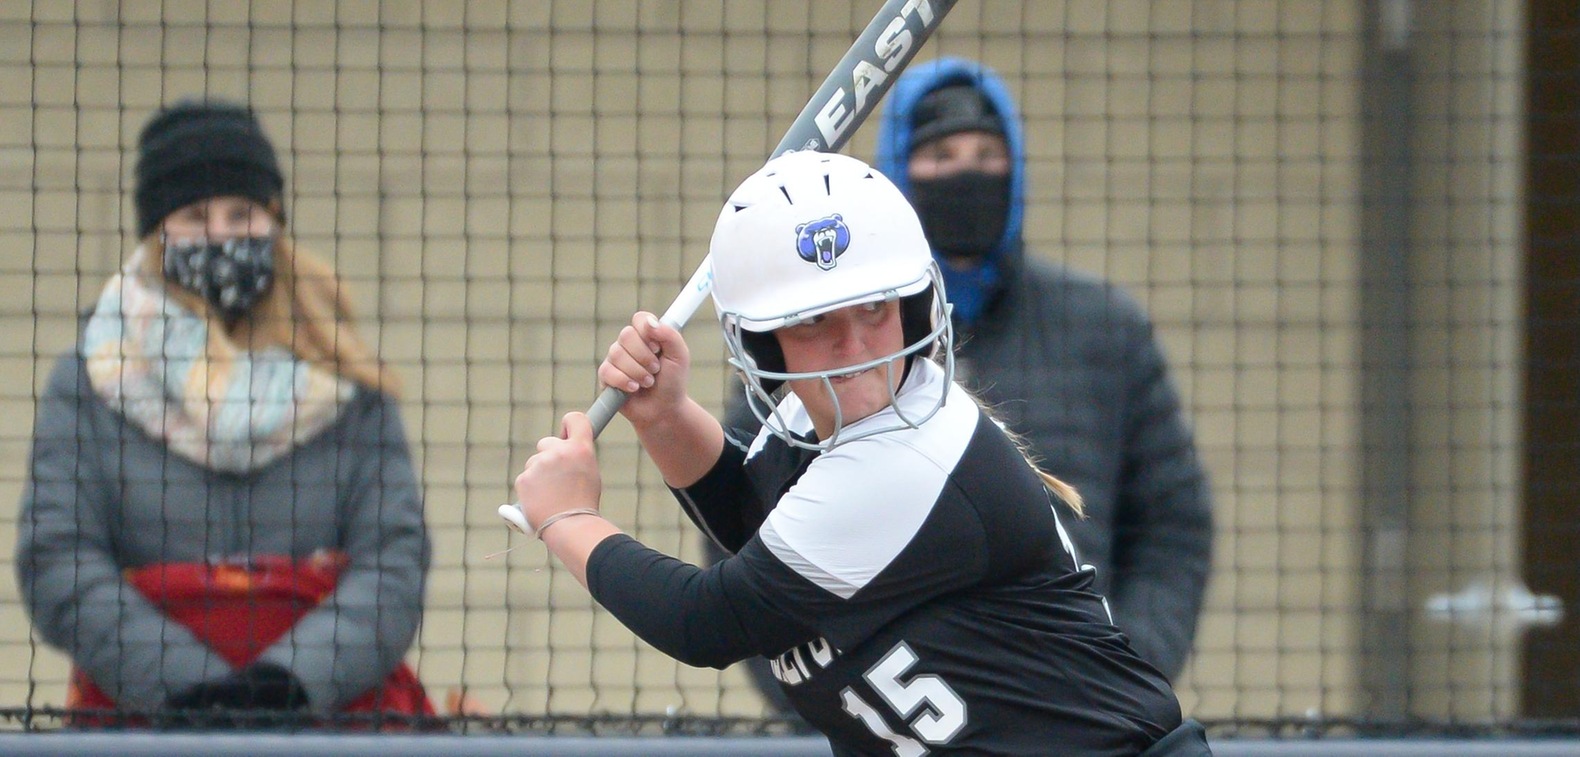 Madison Machacek had a three-run homer in each game, including a walk-off in the nightcap.